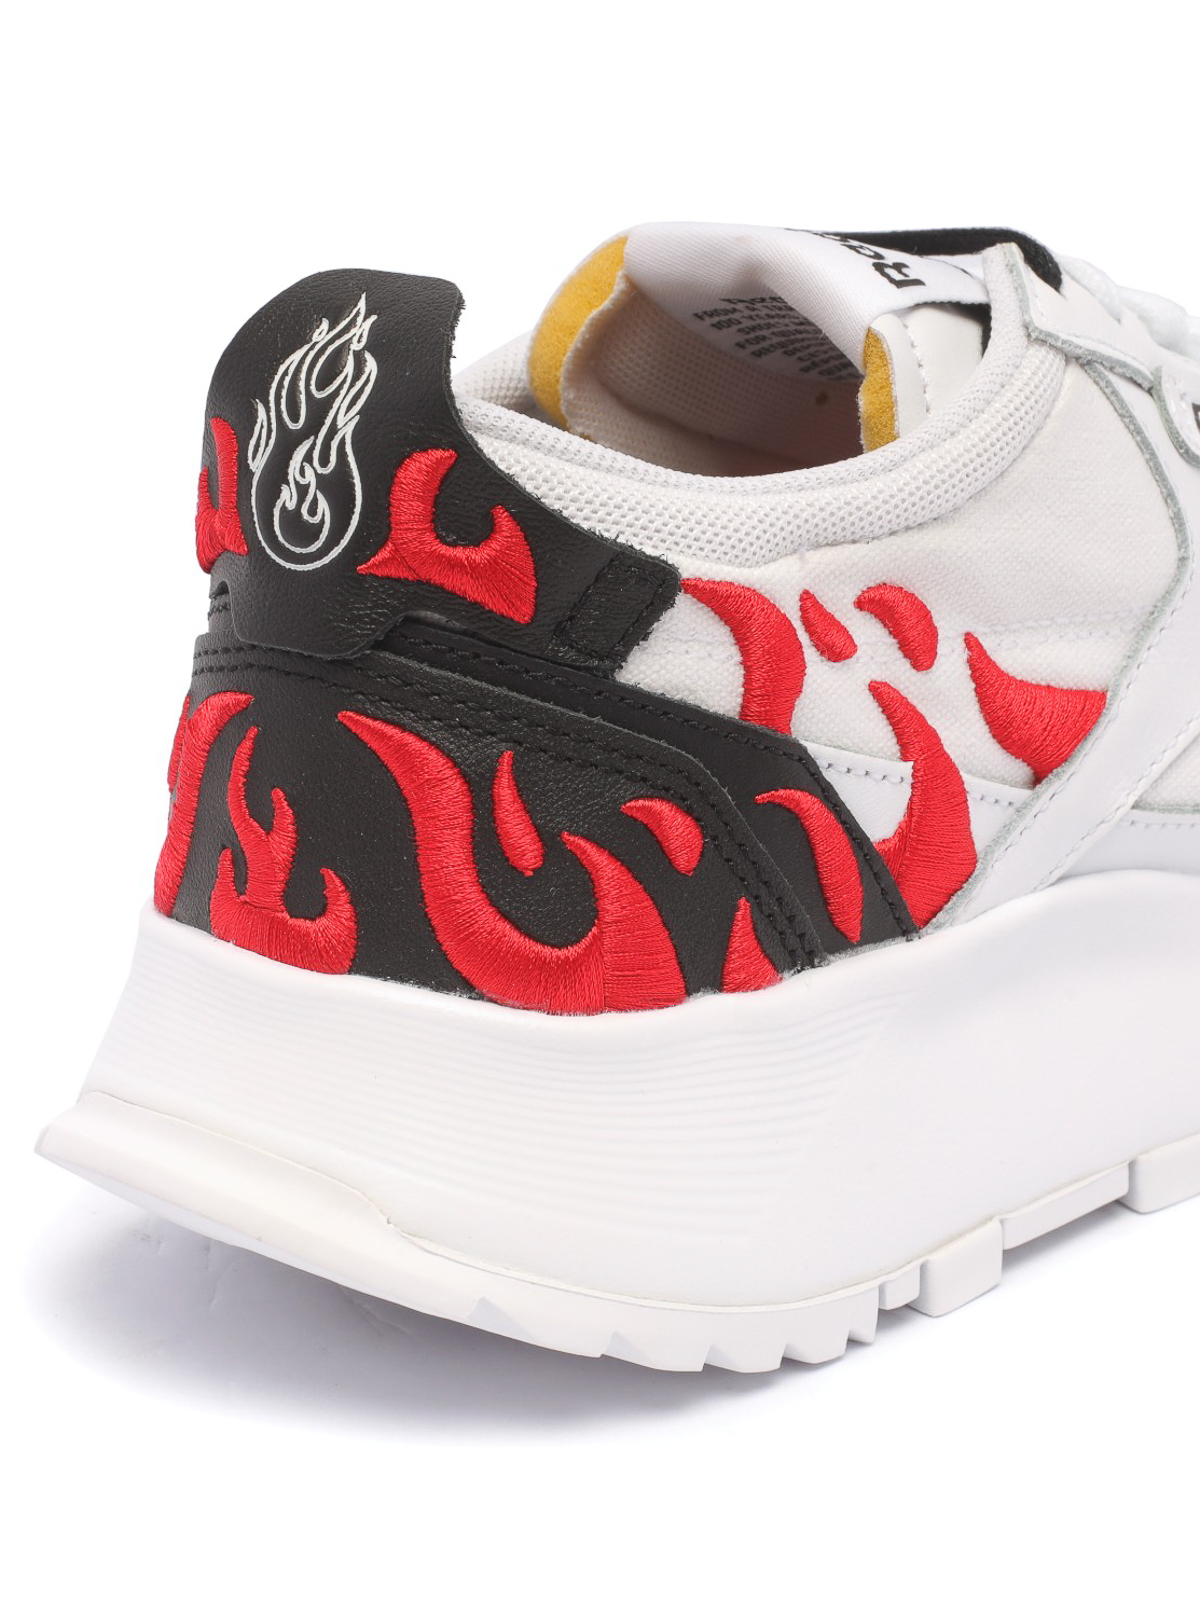 Shop Vision Of Super Flames Detail Lateral Logo Sneakers In White